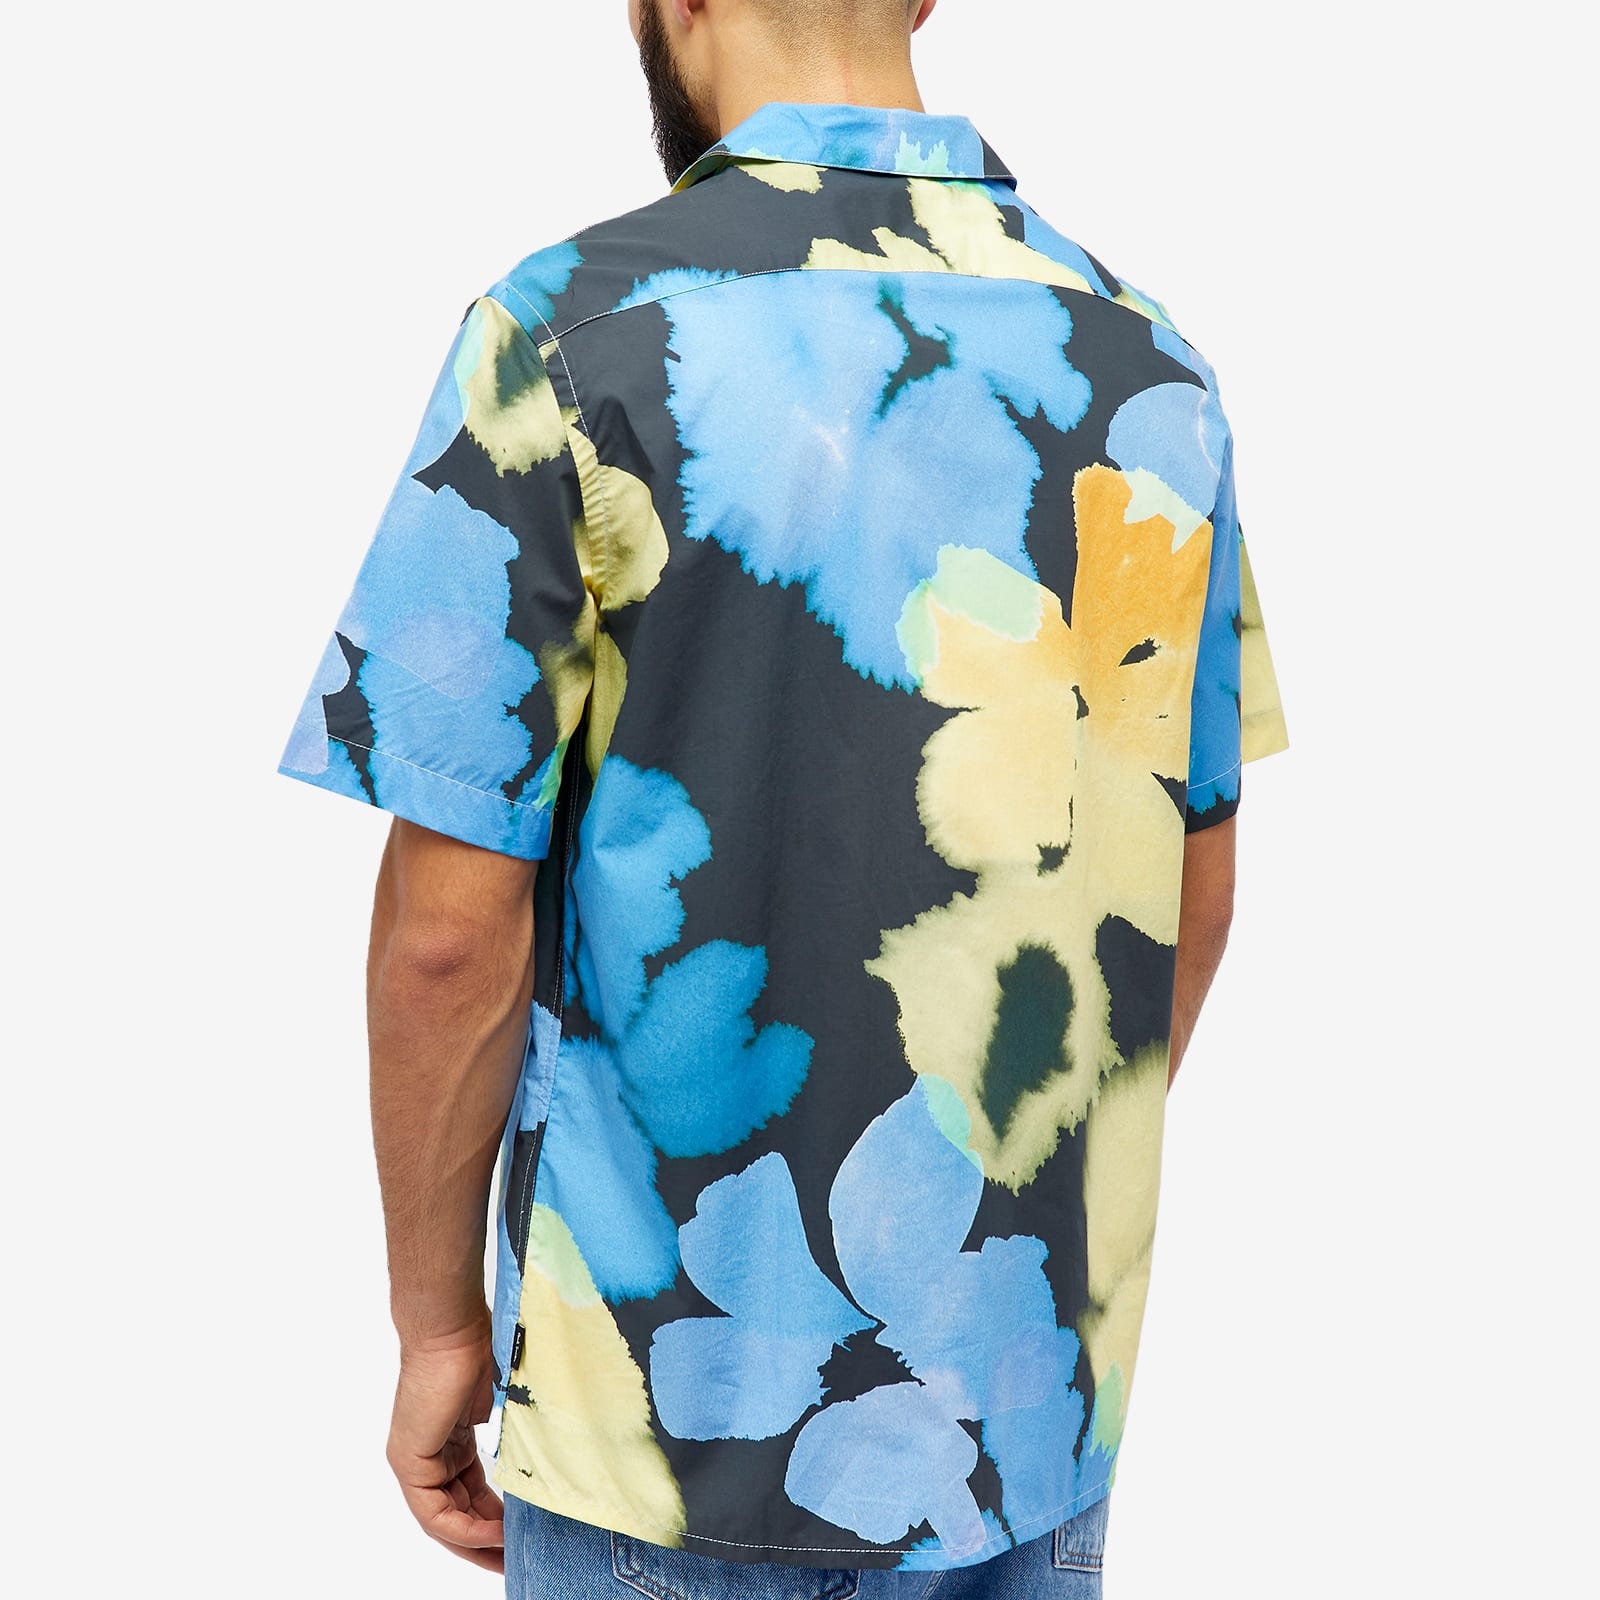 Paul Smith Floral Vacation Shirt - 3